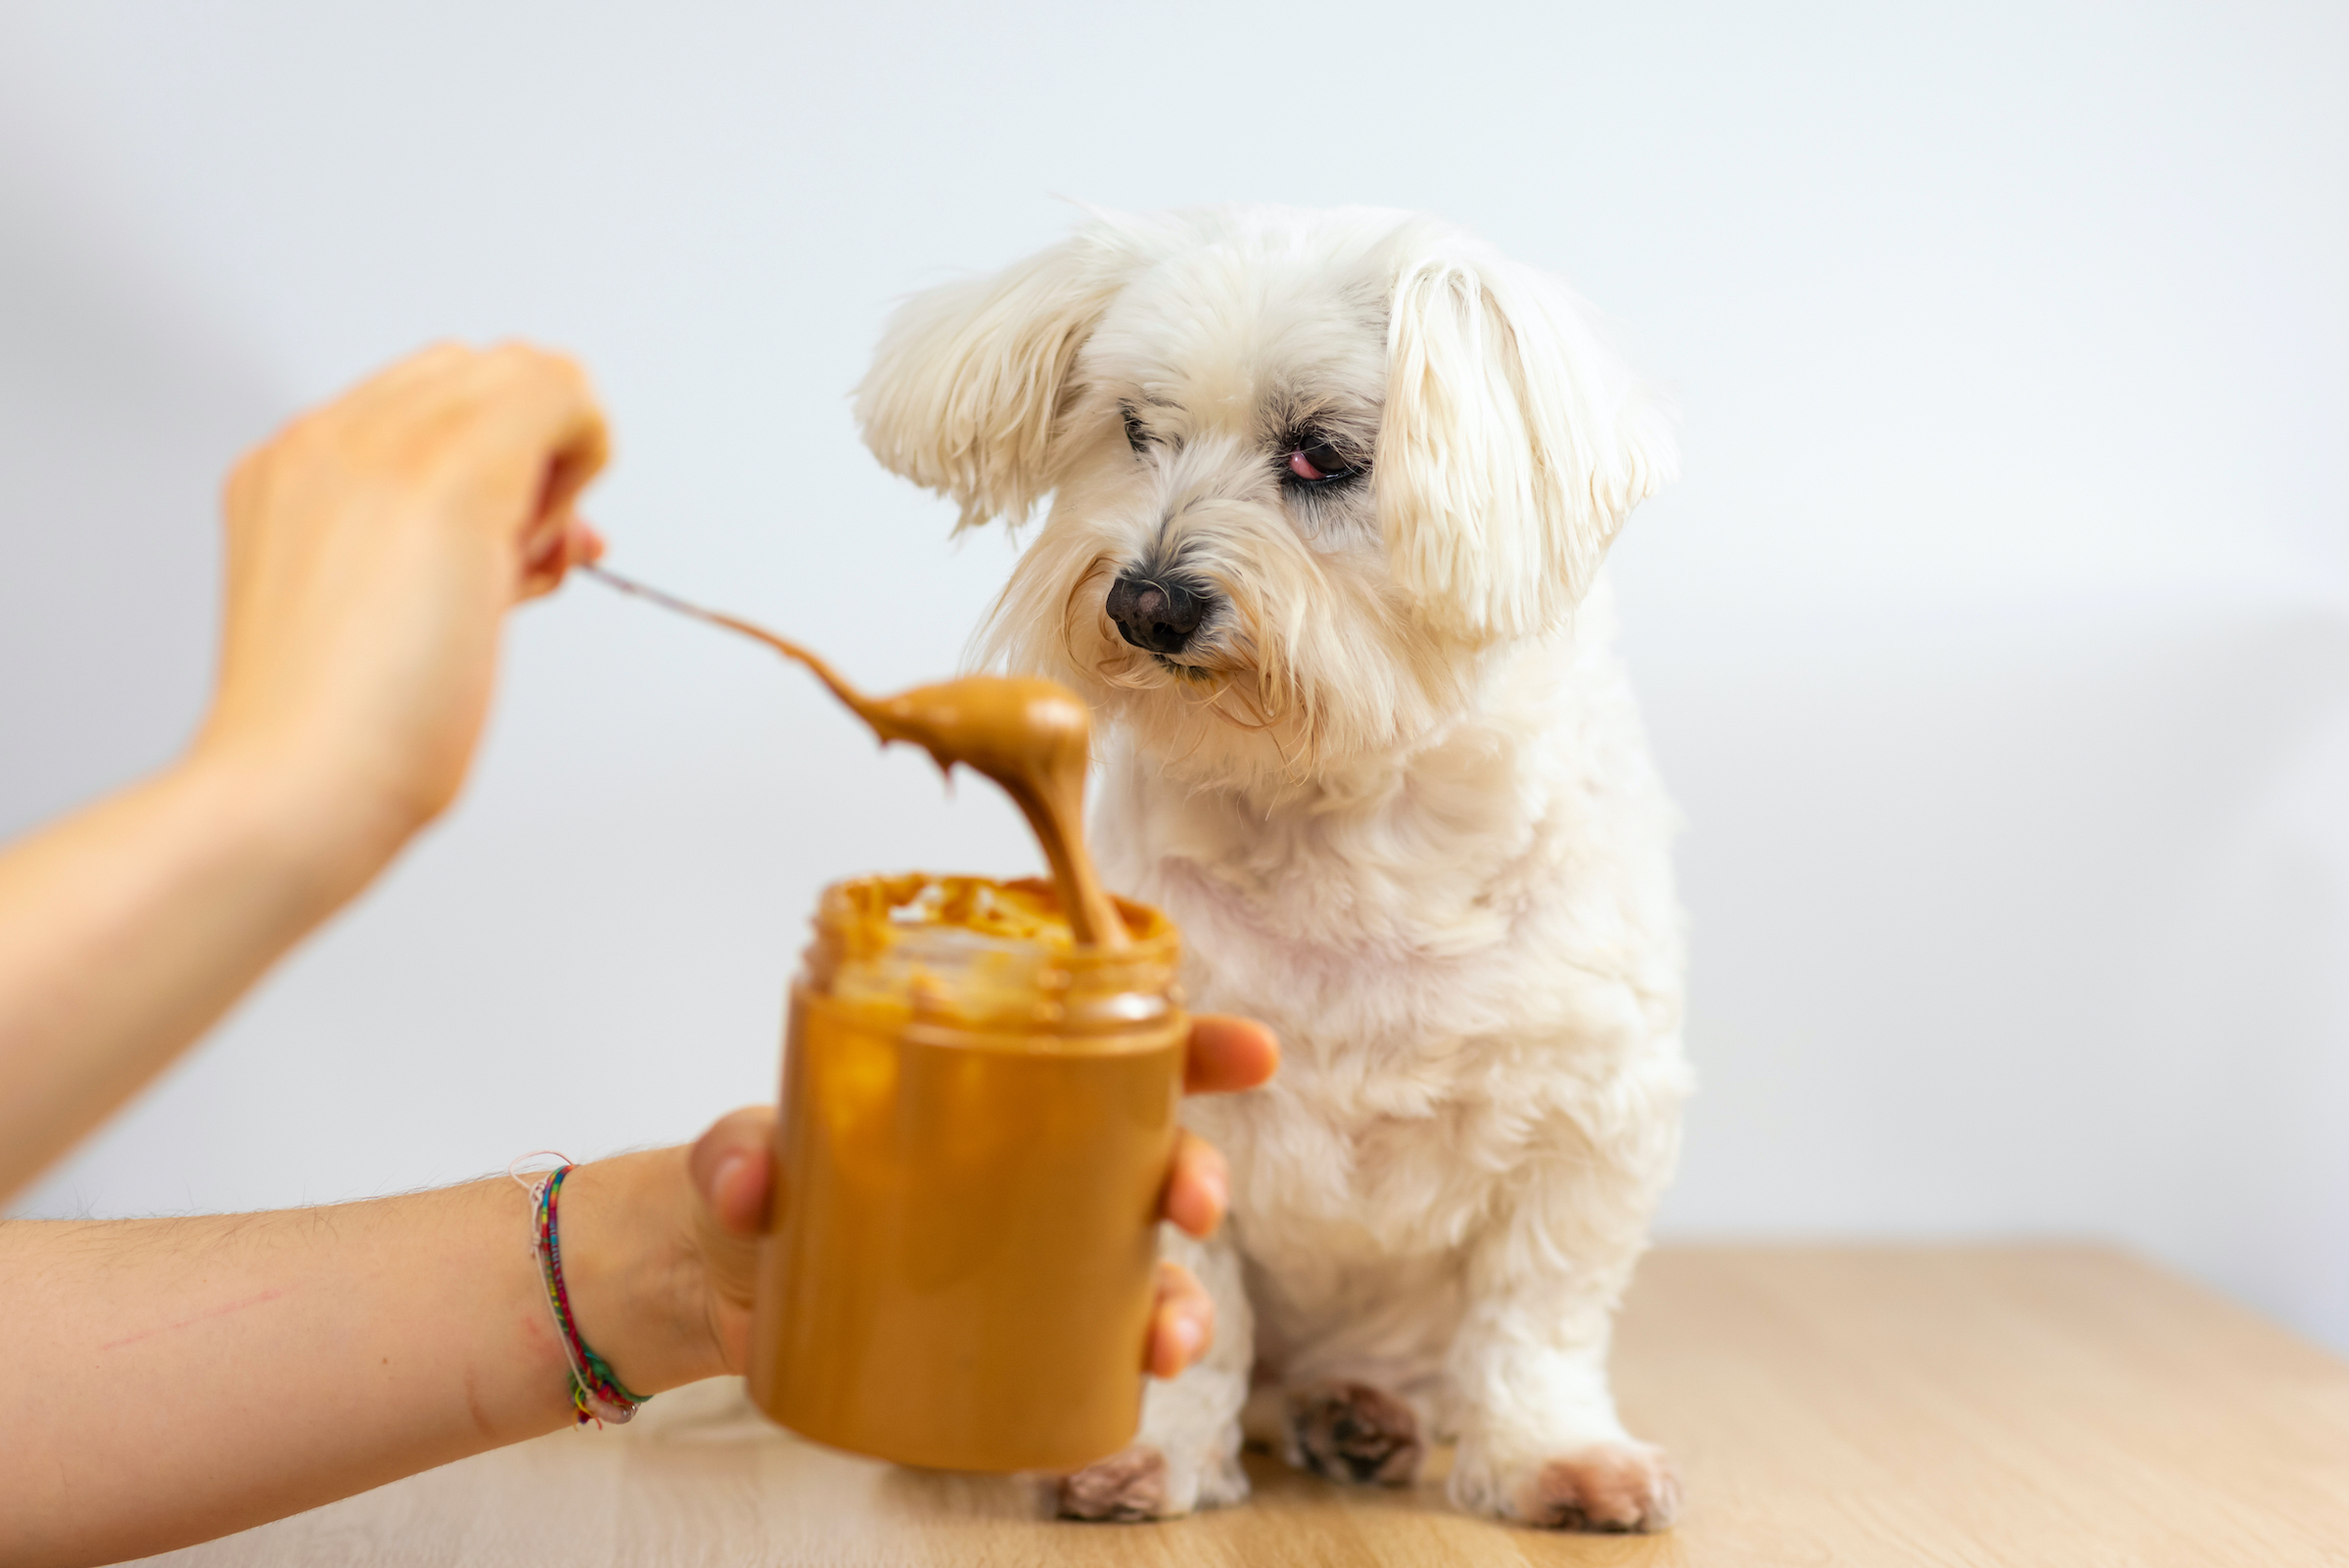 https://www.pawtracks.com/wp-content/uploads/sites/2/2022/04/maltese-dog-watches-owner-spoon-peanut-butter.jpg?fit=2400%2C1602&p=1